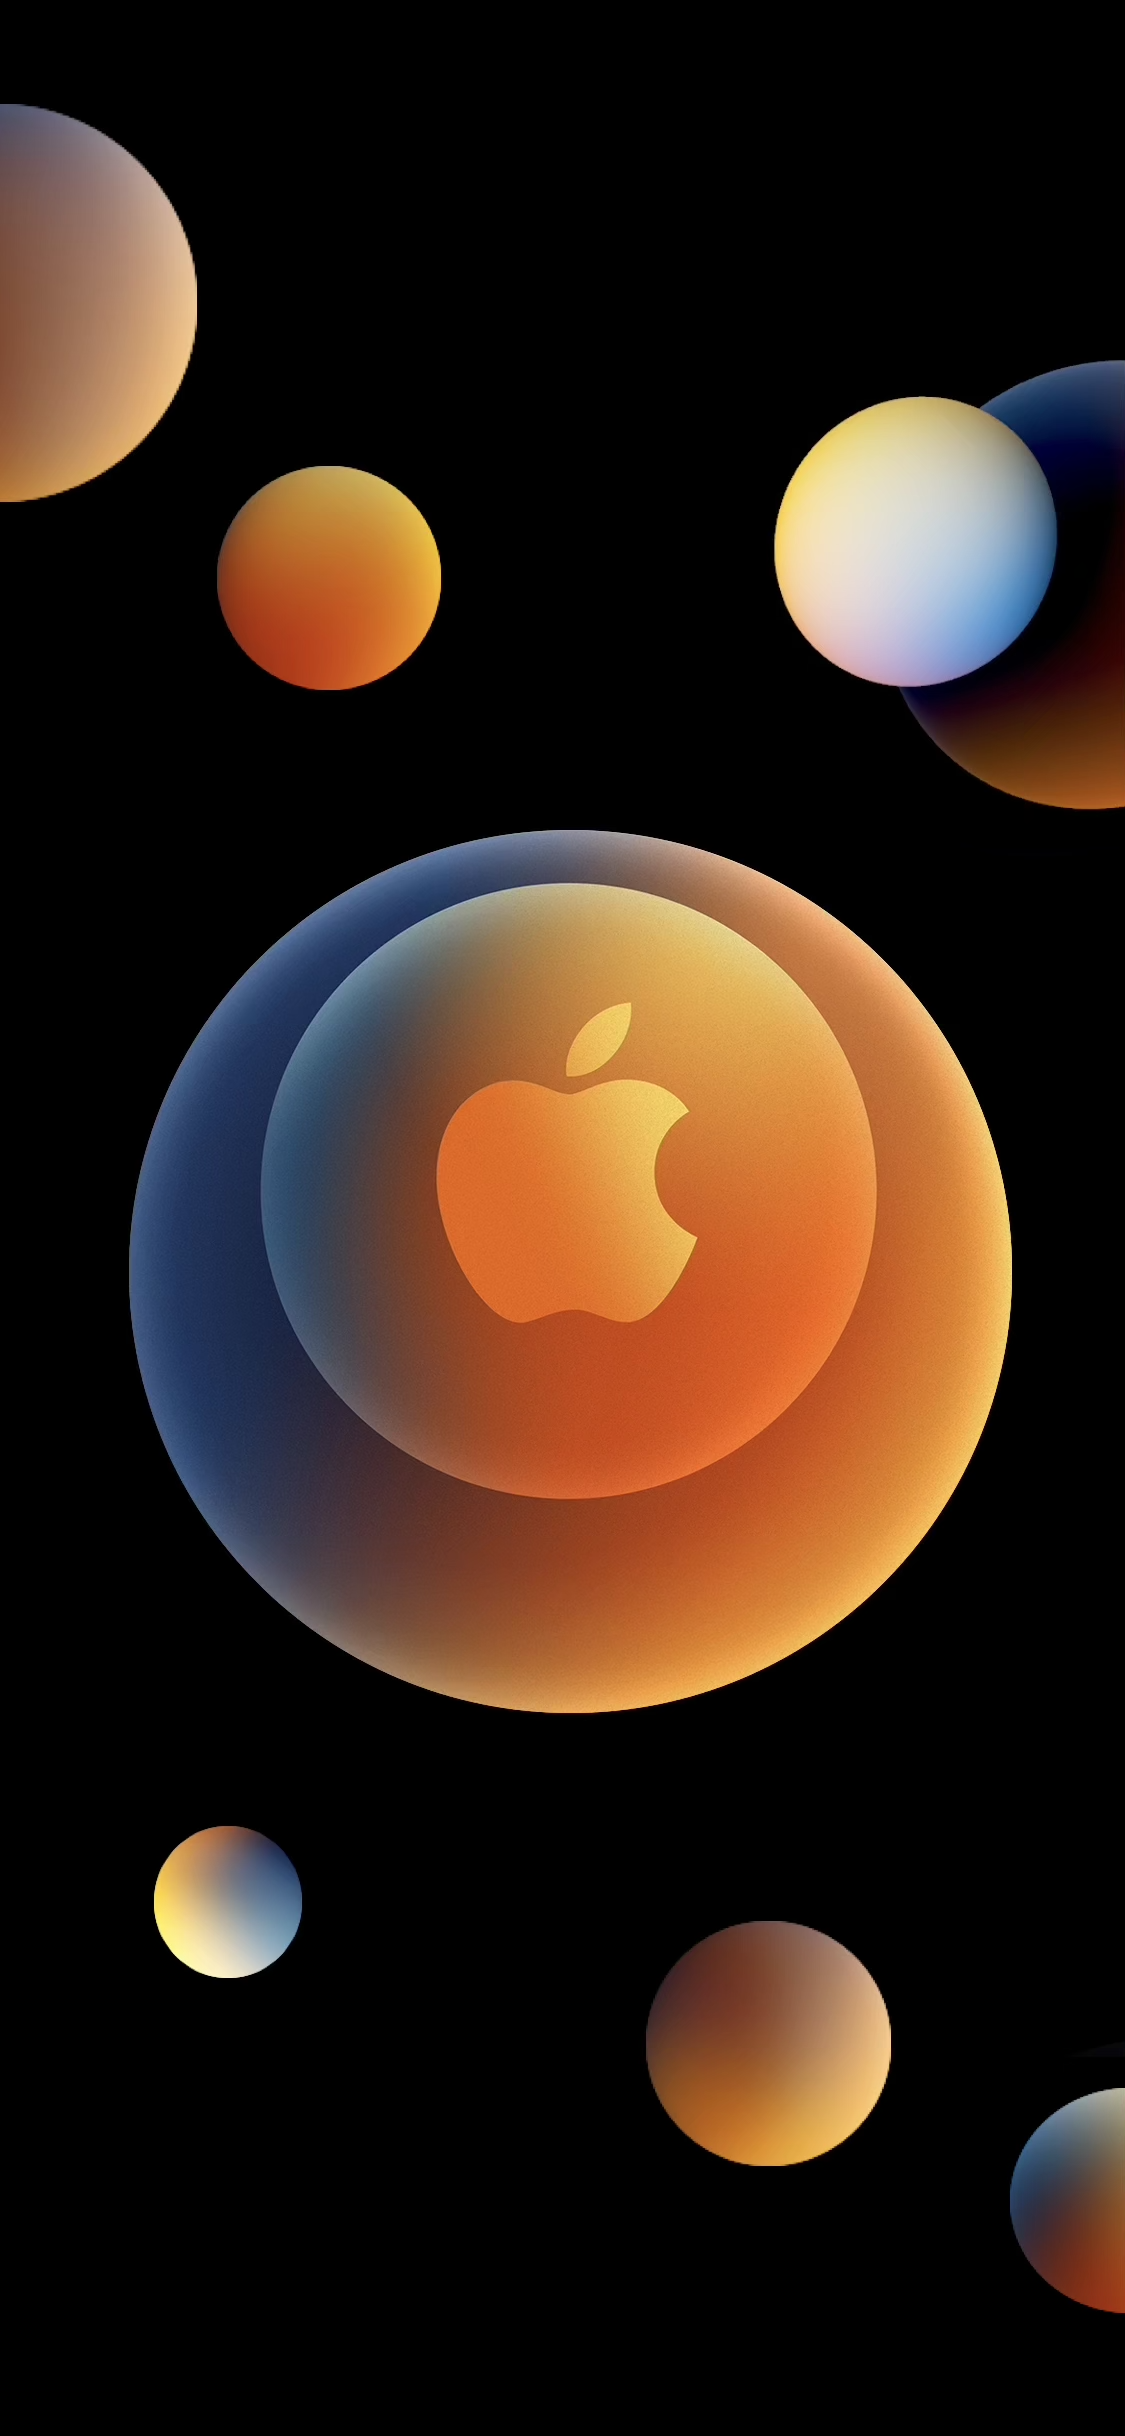 Apple Event Wallpapers - Wallpaper Cave